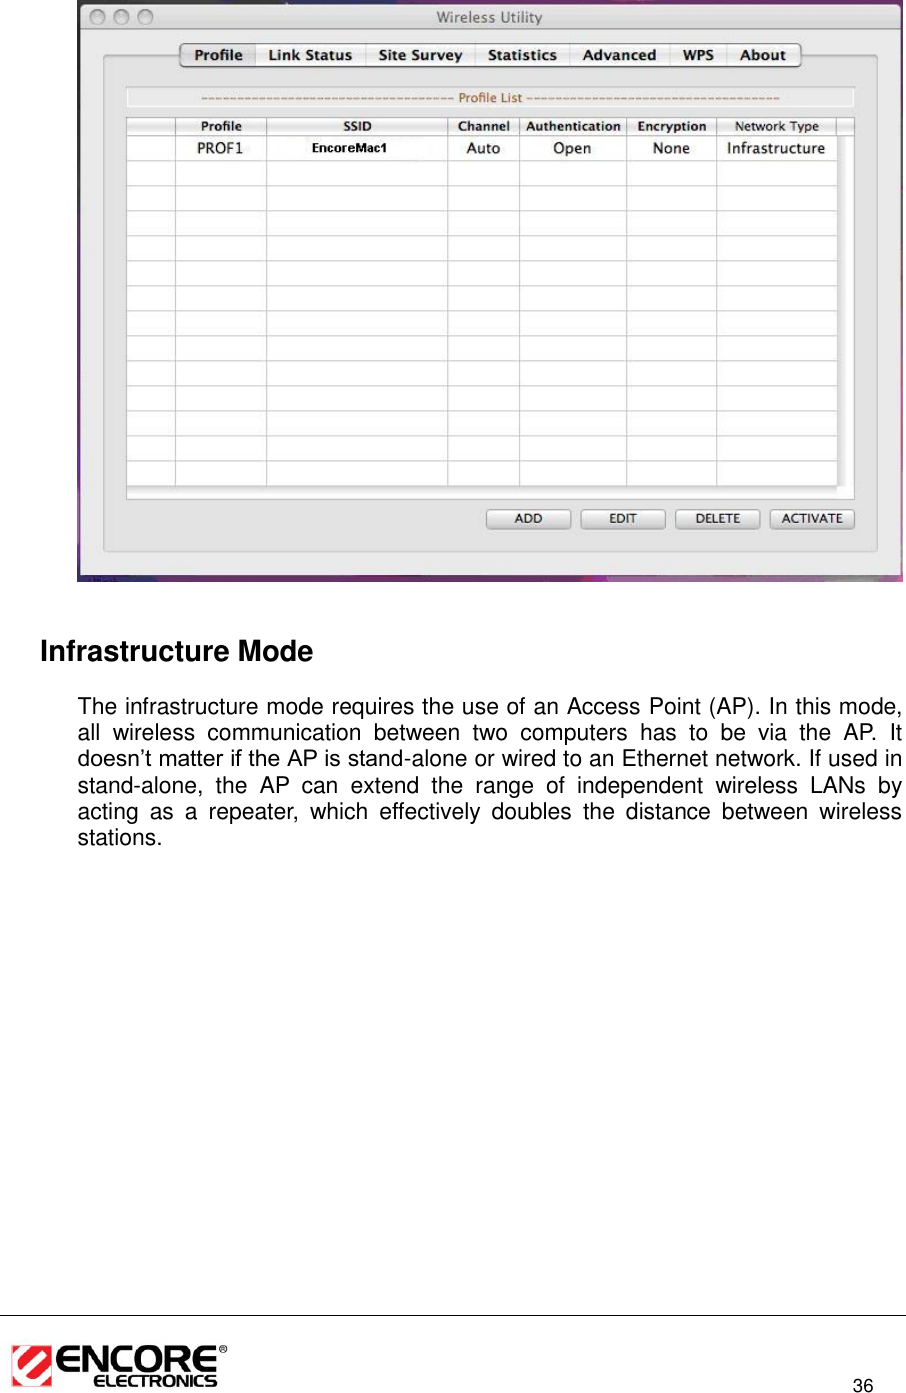                                                                                                                          36       Infrastructure Mode The infrastructure mode requires the use of an Access Point (AP). In this mode, all  wireless  communication  between  two  computers  has  to  be  via  the  AP.  It doesn’t matter if the AP is stand-alone or wired to an Ethernet network. If used in stand-alone,  the  AP  can  extend  the  range  of  independent  wireless  LANs  by acting  as  a  repeater,  which  effectively  doubles  the  distance  between  wireless stations.  